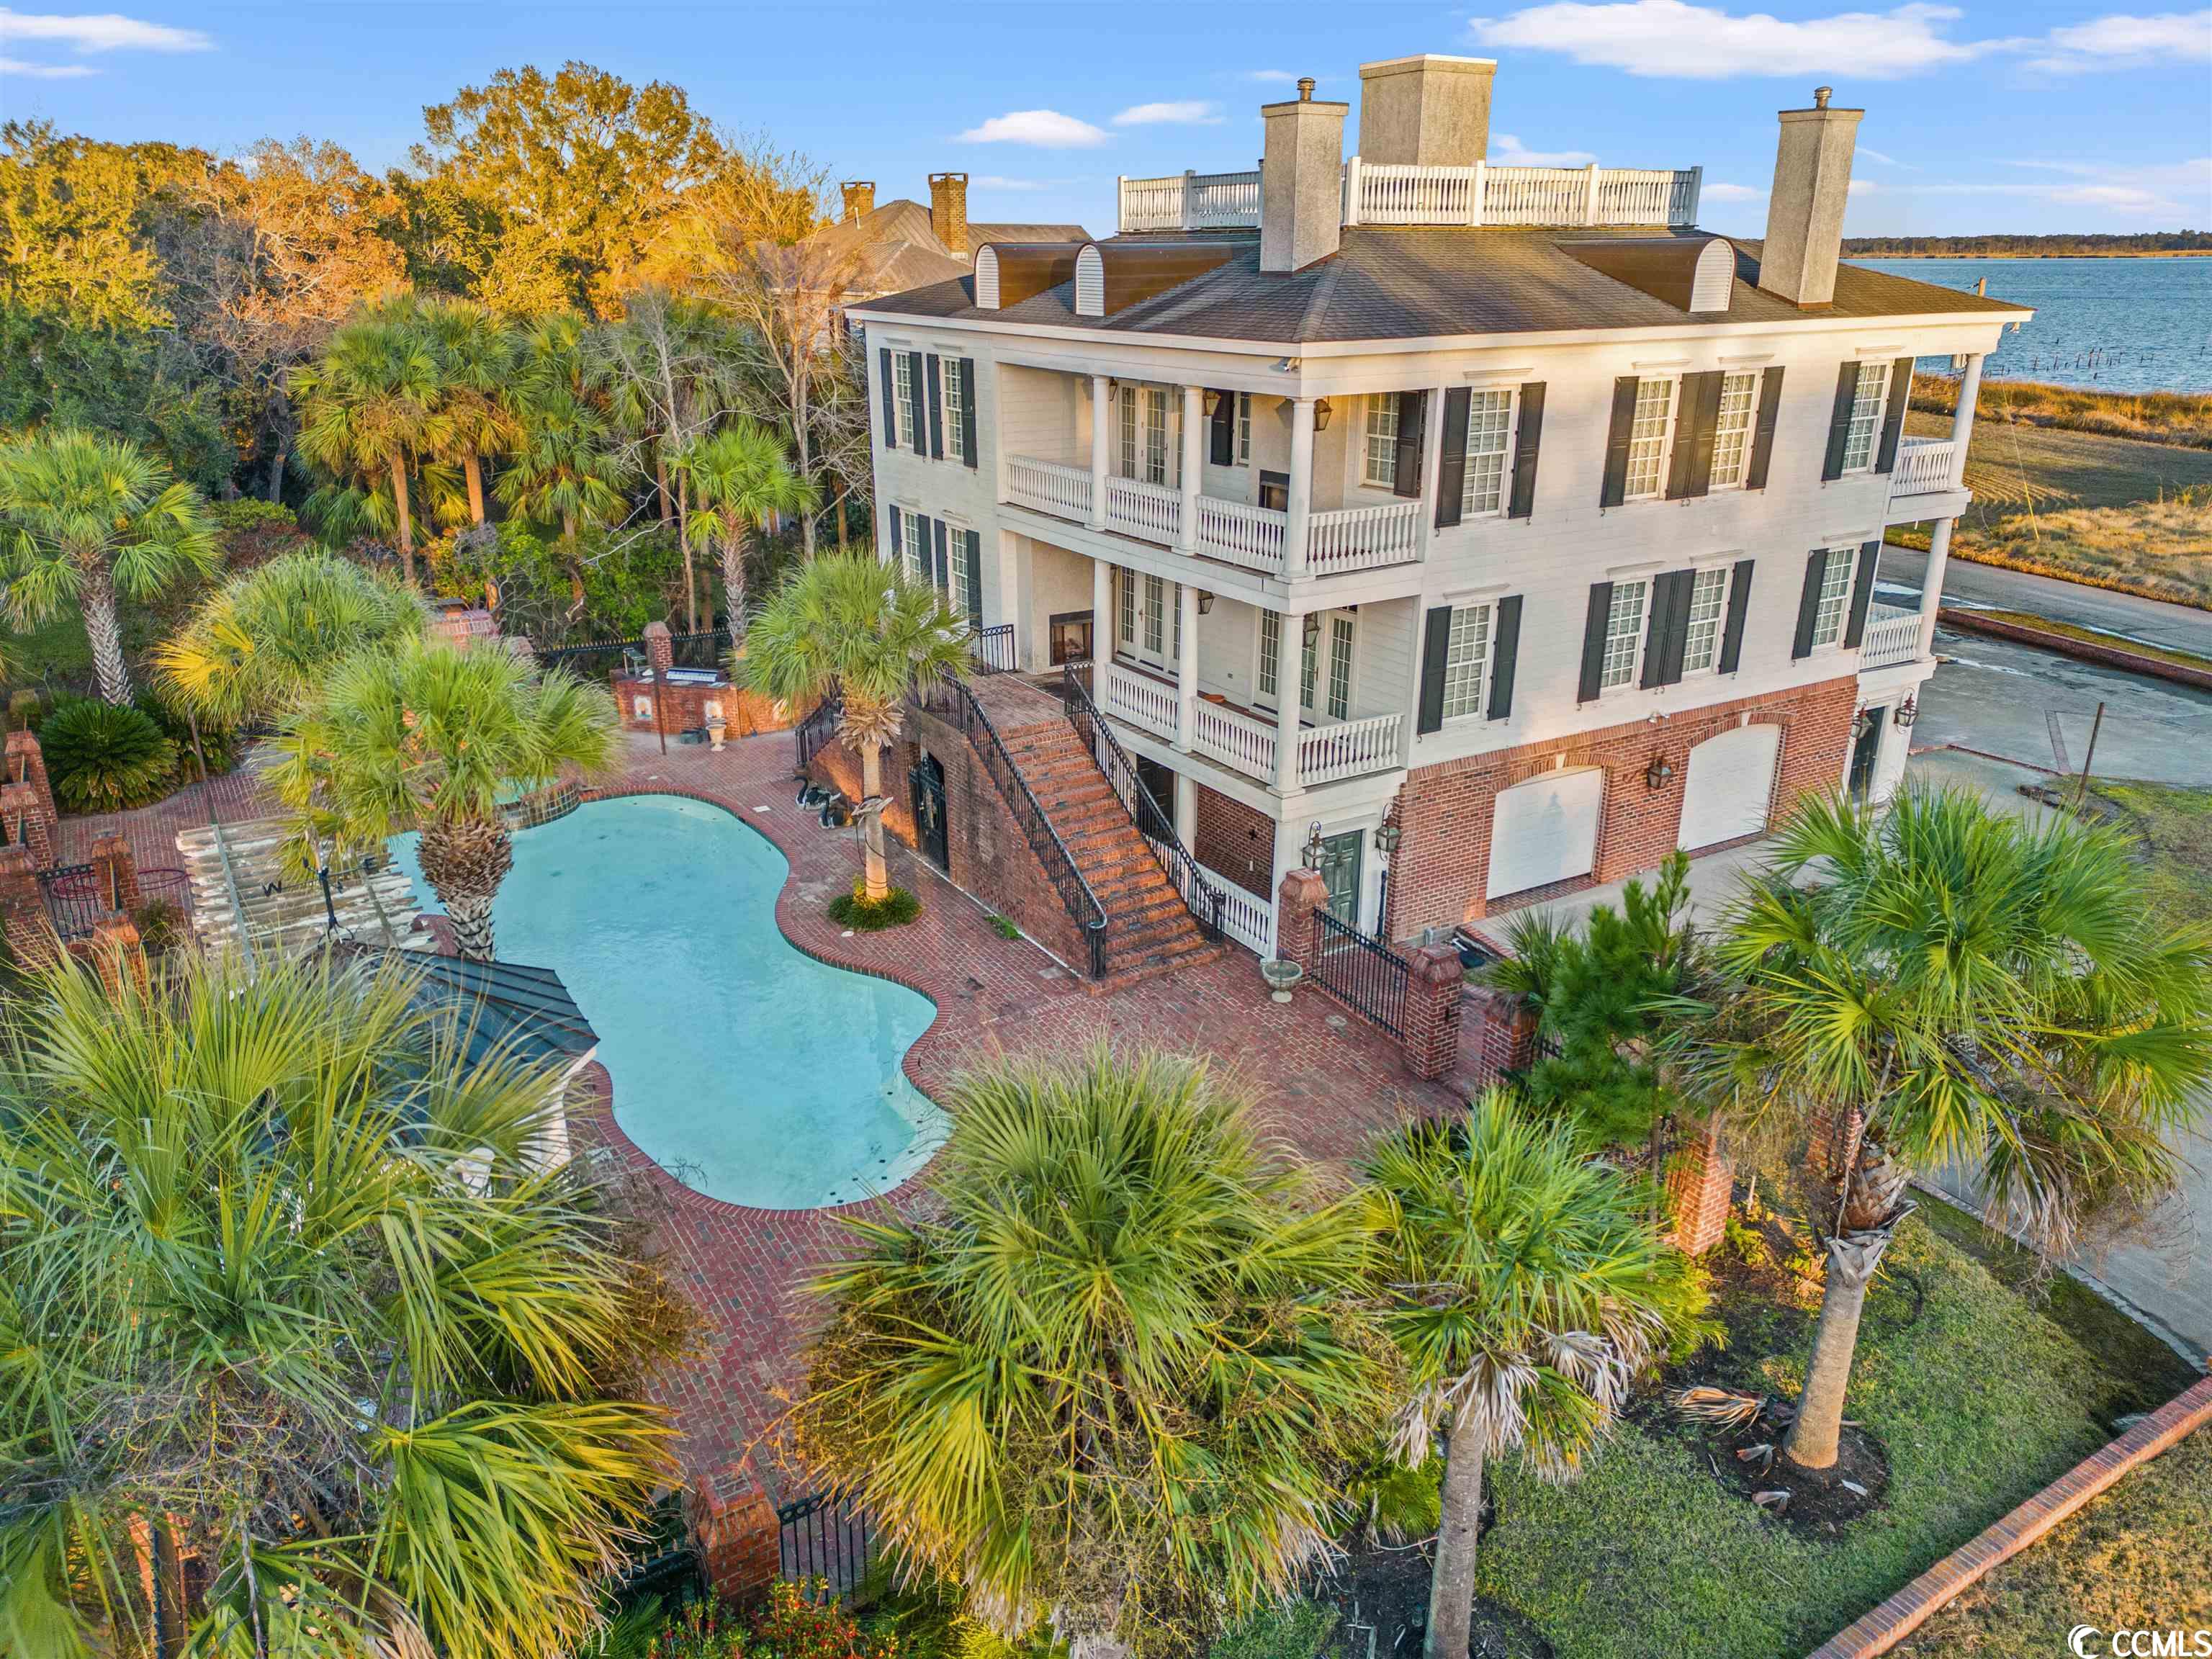 winyahbay/intercoastal waterway estate! with a dream lot directly on winyah bay (intercoastal waterway) this georgetown jewel that would easily fit in with the mansions that line charleston's downtown battery. this custom built home (designed from a plantation in la)  is the epitome of gracious southern living. with a setting overlooking winyah bay (& including the large waterfront acreage across the street) the home is adjacent to east bay park & downtown boat landing with access to the intercoastal waterway & the atlantic ocean. this beautiful home has just undergone an extensive renovation. custom details abound throughout from palmetto stone over the brick entrances, italian tiles in the backyard kitchen, the carved palmetto & crescent moon chair rail(no longer made due to expense), the sc seal brass medallions adorning the fireplaces and tradd street charleston gas lights throughout. as you walk through the mahogany front door, elegant formal living and dining rooms complete with wainscotting lead to the large family room and kitchen featuring a 60" viking commercial oven with hood, kohler sink with built in steamer, kohler bar sink on large island, viking electric oven, warming drawers, trash compactor, 48" viking refrigerator and fisher pactel built in dishwasher 'drawers'. this floor includes one of the two laundry rooms, powder room with progressive lights & wine room. home features a large master bedroom and bath (which includes one of the nine fireplaces), two more bedrooms, each with their own bath and a study/sitting/4th bedroom. a full size staircase takes you to the attic for storage galore. take the elevator to the rooftop 'widows walk' for breathtaking views of the park, winyah bay & hobcaw barony to enjoy bay breezes under starry skies. just imagine a family rooftop wedding!!  the spacious cherry paneled elevator travels from the ground level to rooftop for easy access to all floors. on the ground level, you will find a garage that has openings on both ends, bottom foyer entry, 2nd downstairs laundry, an extra large bathroom for pool and patio dinner guests, and more storage. the backyard oasis includes pool with a waterfall, gazebo and expansive outdoor kitchen for entertaining al fresco. pool and hot tub can be heated if purchaser desires to add heater.  home also features commercial caterpillar generator in case of power outages, inside and outside speakers and sprinkler system. plantation shutters and hurricane shutters stay with home. because georgetown is a waterfront town , the streets around the home have intermittent tidal flooding . however, the home has not flooded.  the waterfront lot directly across from the home on winyah bay, which is included in the sale, is the site of the old ferry that traveled to waverly mills to transport travelers to pawleys island. owners have inquired to the corp.of engineers and putting your own boat dock on winyah bay should be permissible. historic remnants of the pier are still visible. downtown georgetown's shopping, restaurants and harborwalk are just blocks away, the beaches of pawleys island 12 miles, myrtle beach 30 miles and charleston 60 miles to the south. video has been provided with listing to showcase this fine home.